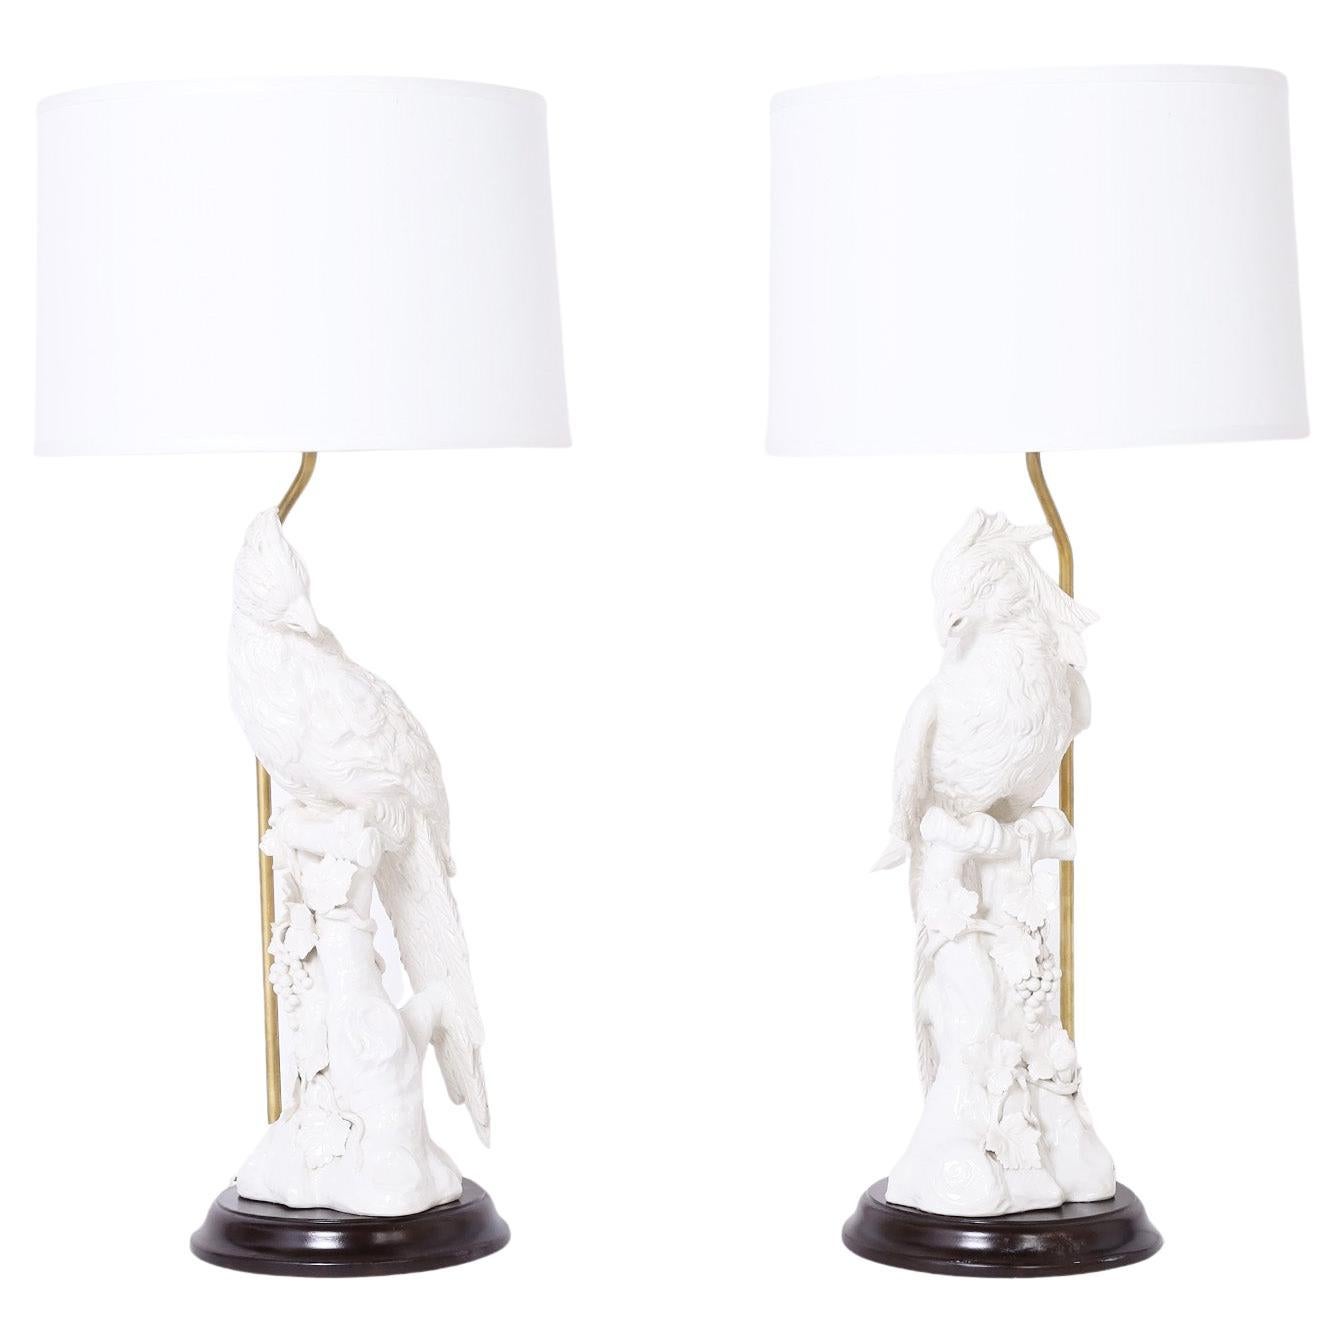 Pair of Glazed Earthenware Bird or Parrot Table Lamps